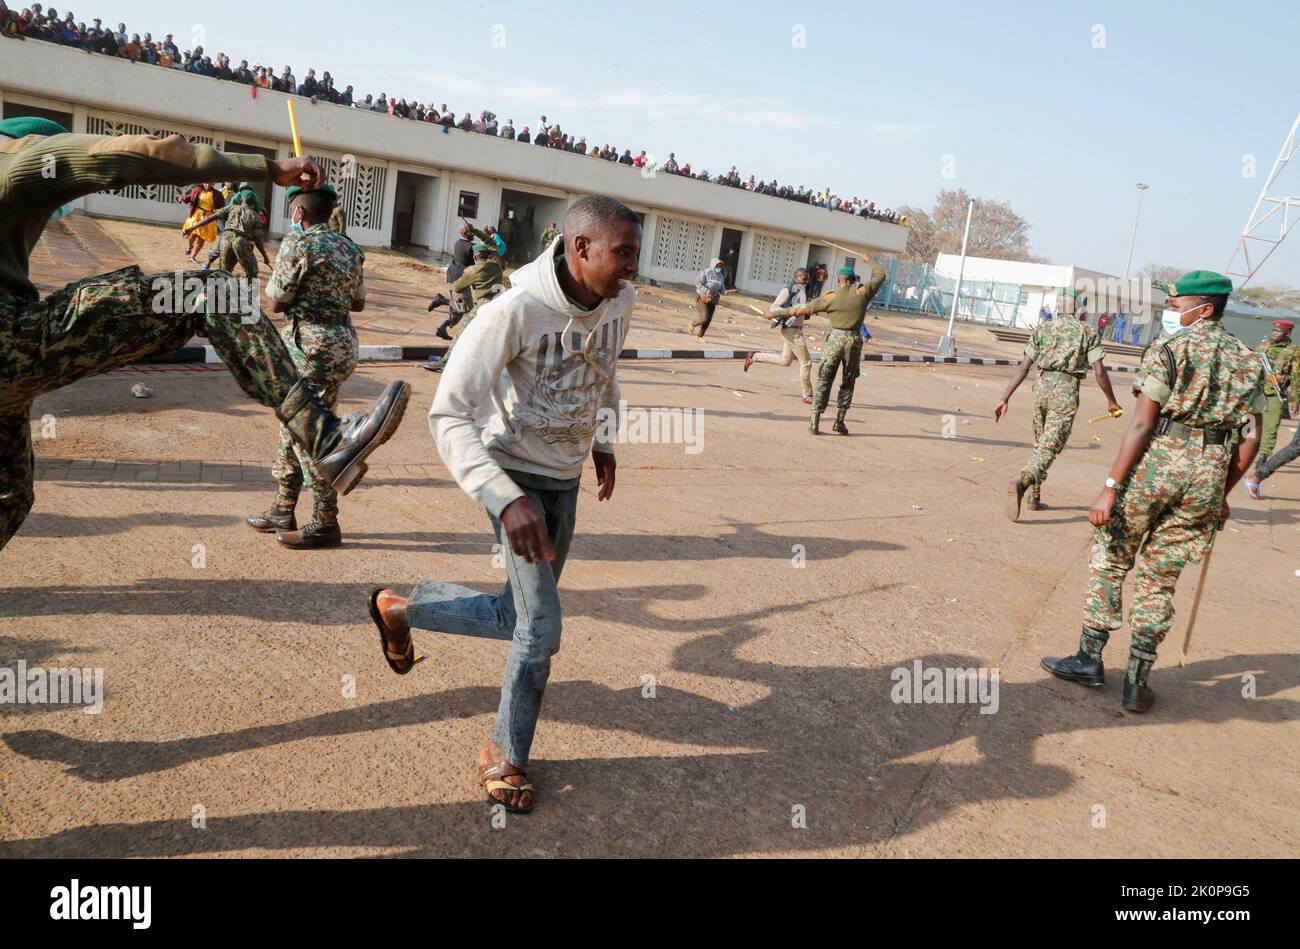 A man runs past riot police as they attempt to control people jostling to attend the inauguration of Kenya's President William Ruto before his swearing-in ceremony at the Moi International Stadium Kasarani, in Nairobi, Kenya September 13, 2022. REUTERS/Thomas Mukoya Stock Photo